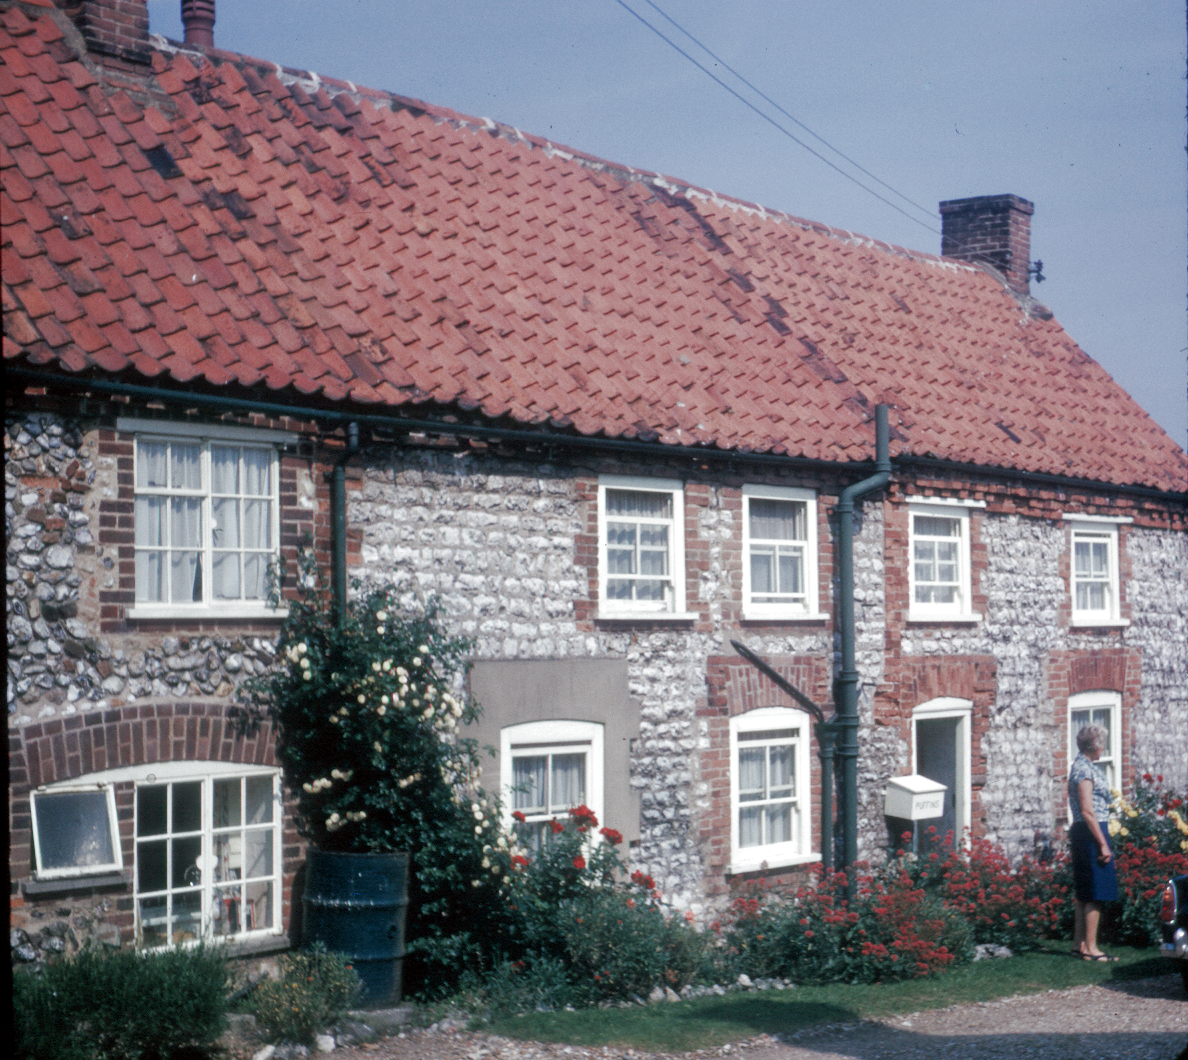 6601122k June 1966 - We stayed at Puffins, a cottage at Brancaster, Norfolk. It belonged to Peter Harrild, my boss at Ferranti.